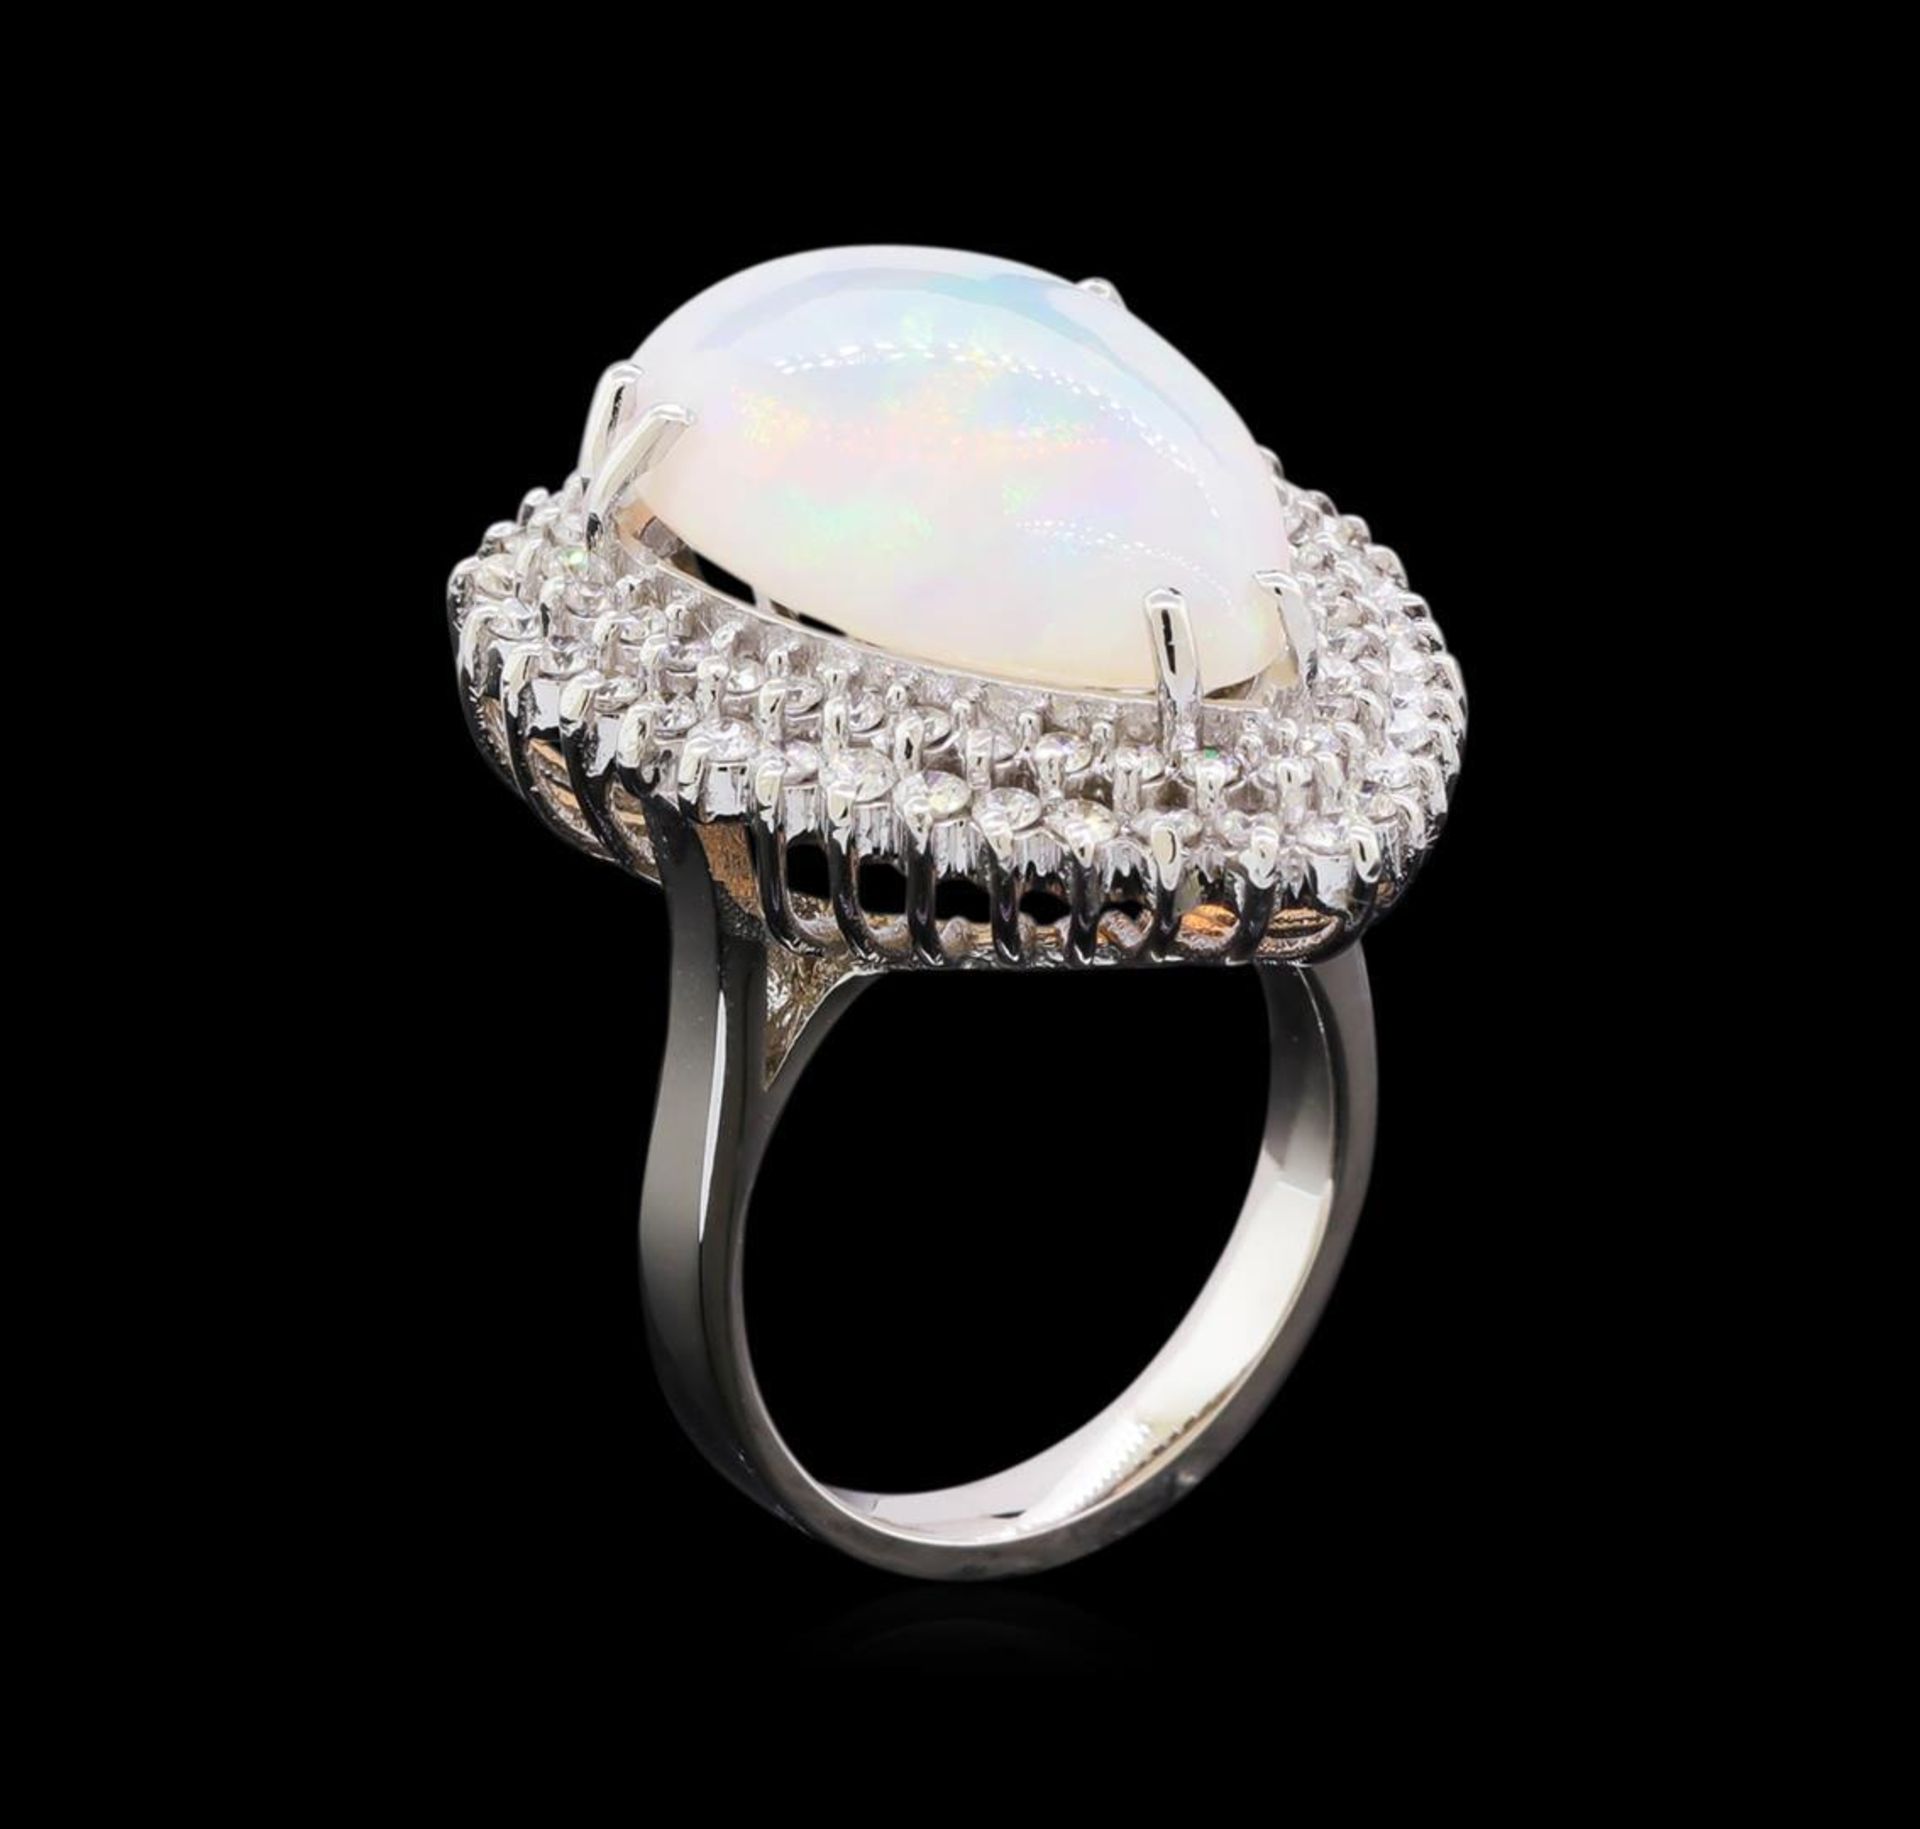 8.65 ctw Opal and Diamond Ring - 14KT White Gold - Image 4 of 5